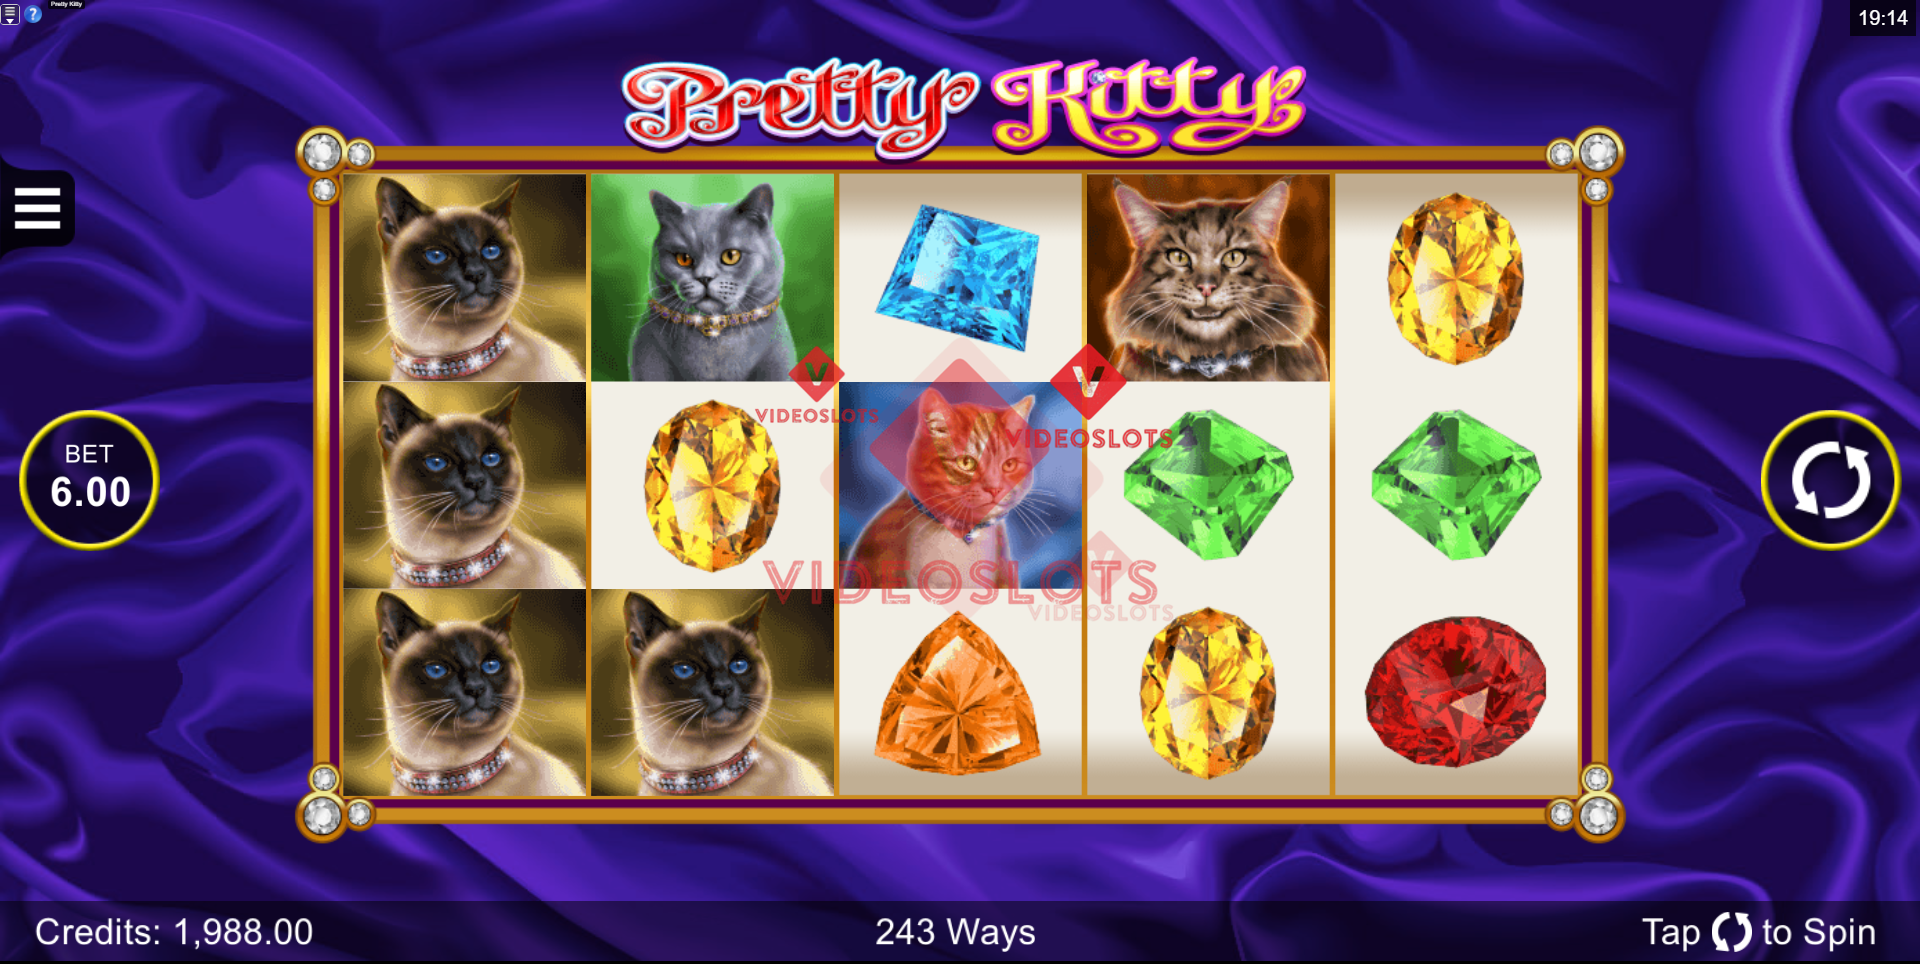 Base Game for Pretty Kitty slot for Microgaming